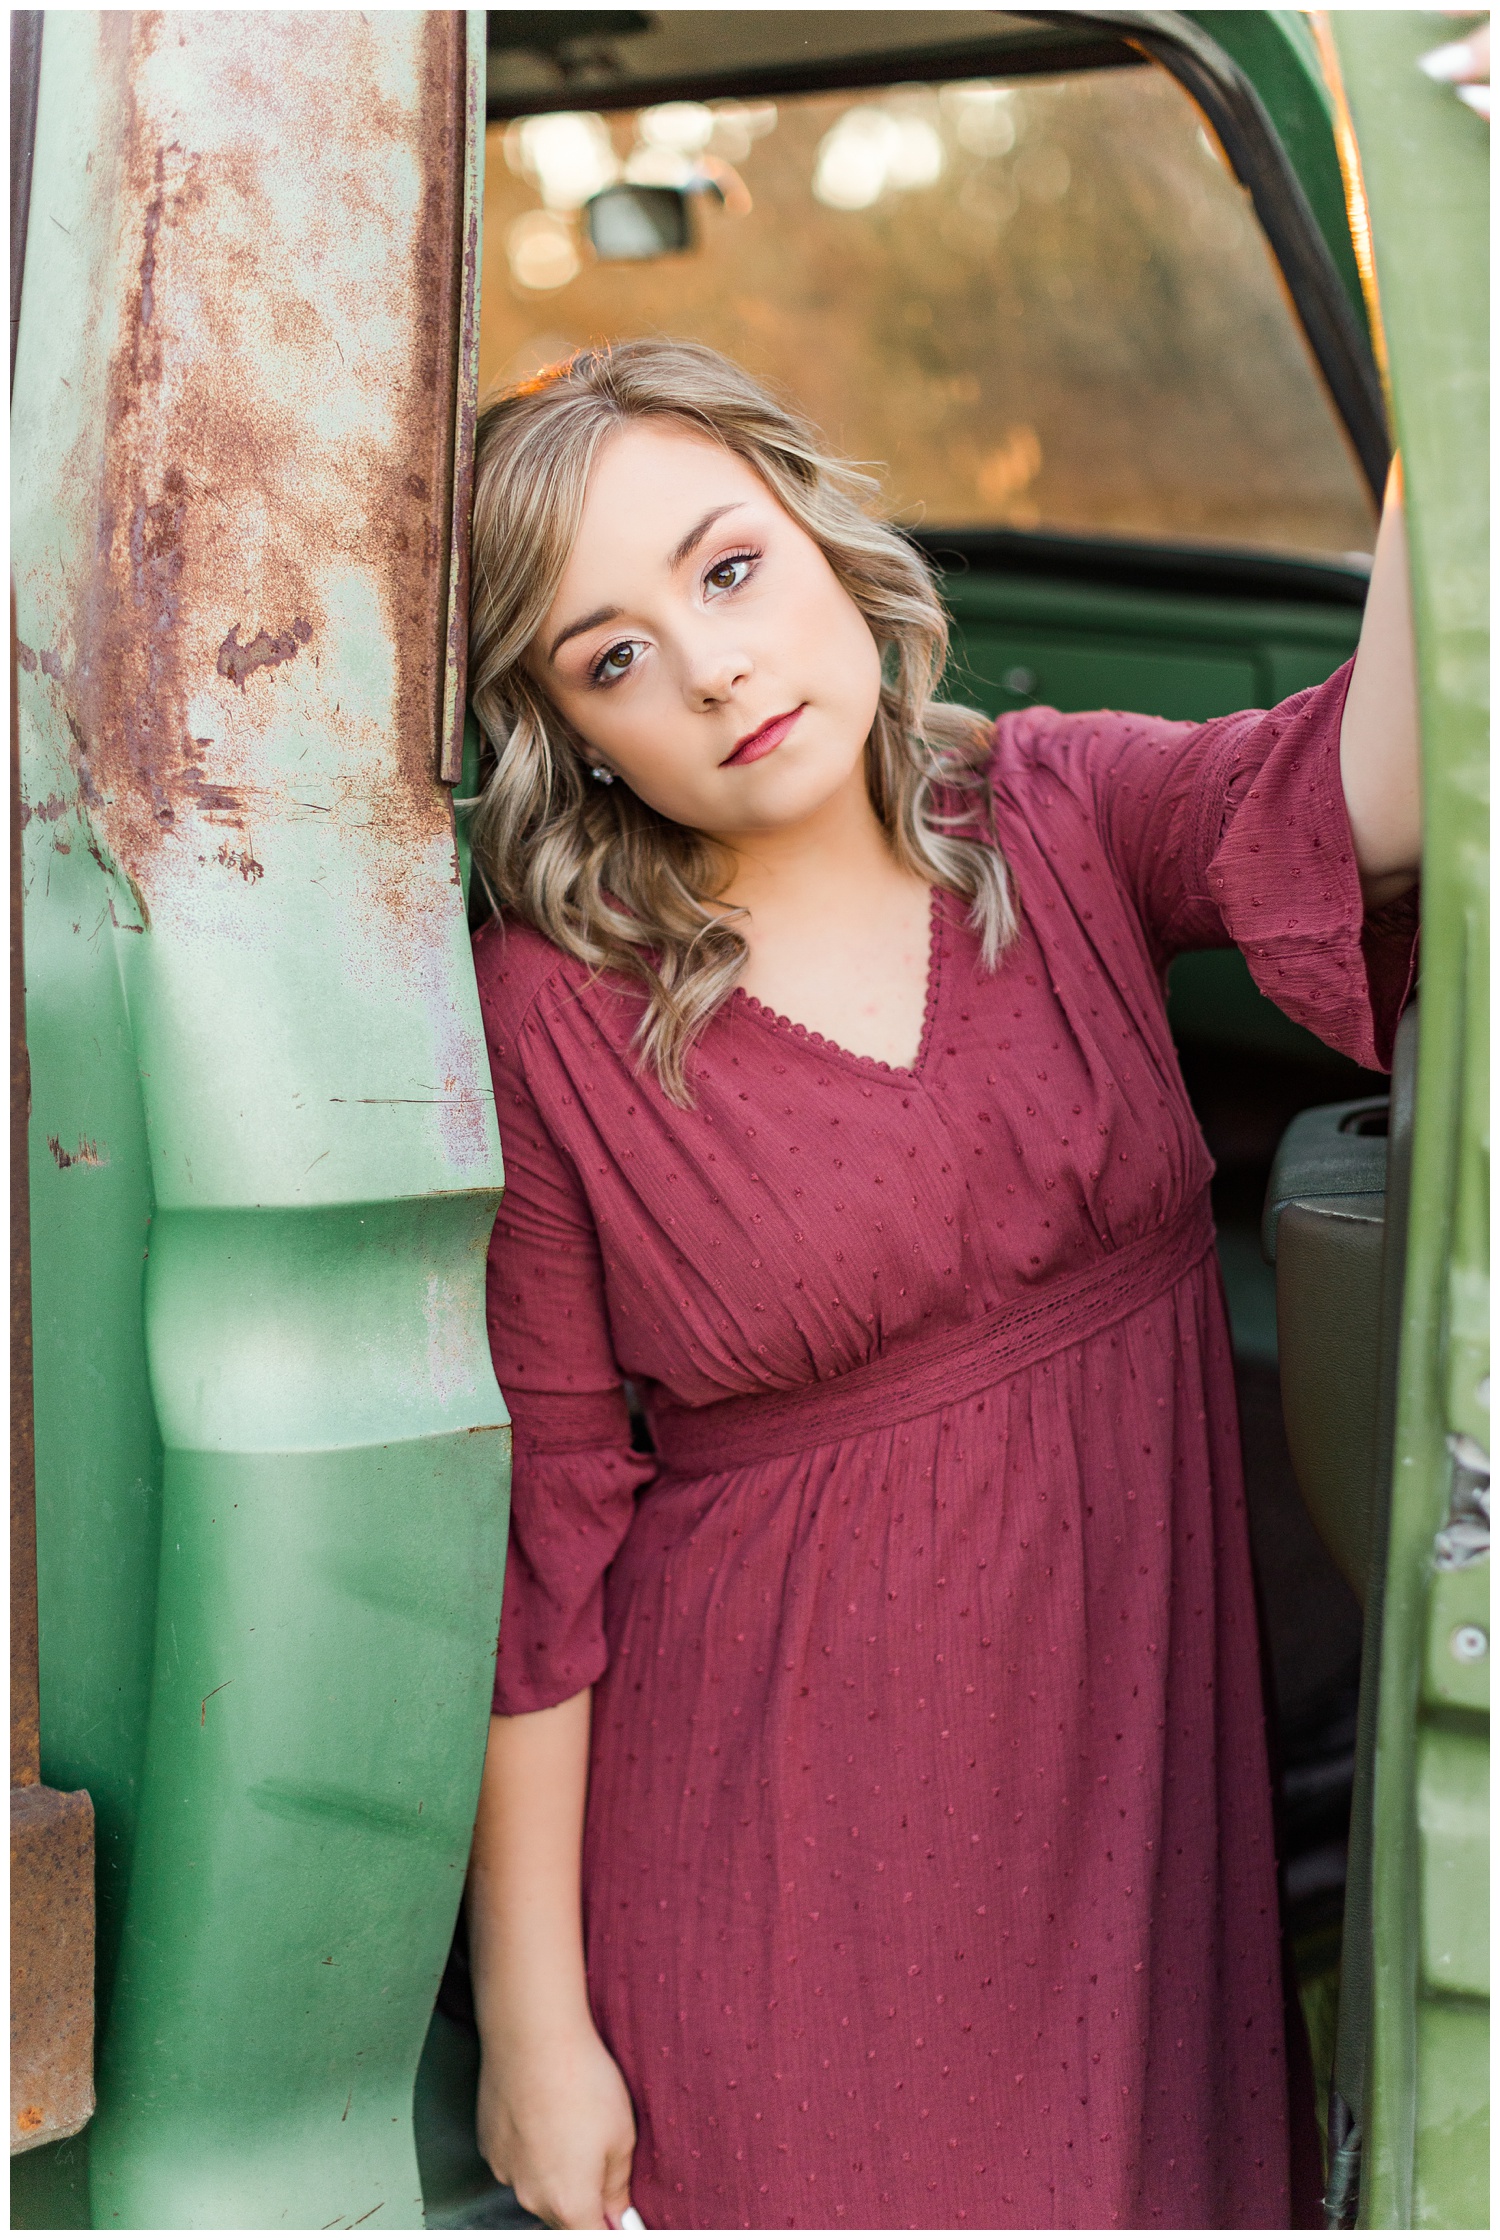 Cloey, wearing a vintage red dress, leans against the passenger doorway of an old rusty truck | CB Studio